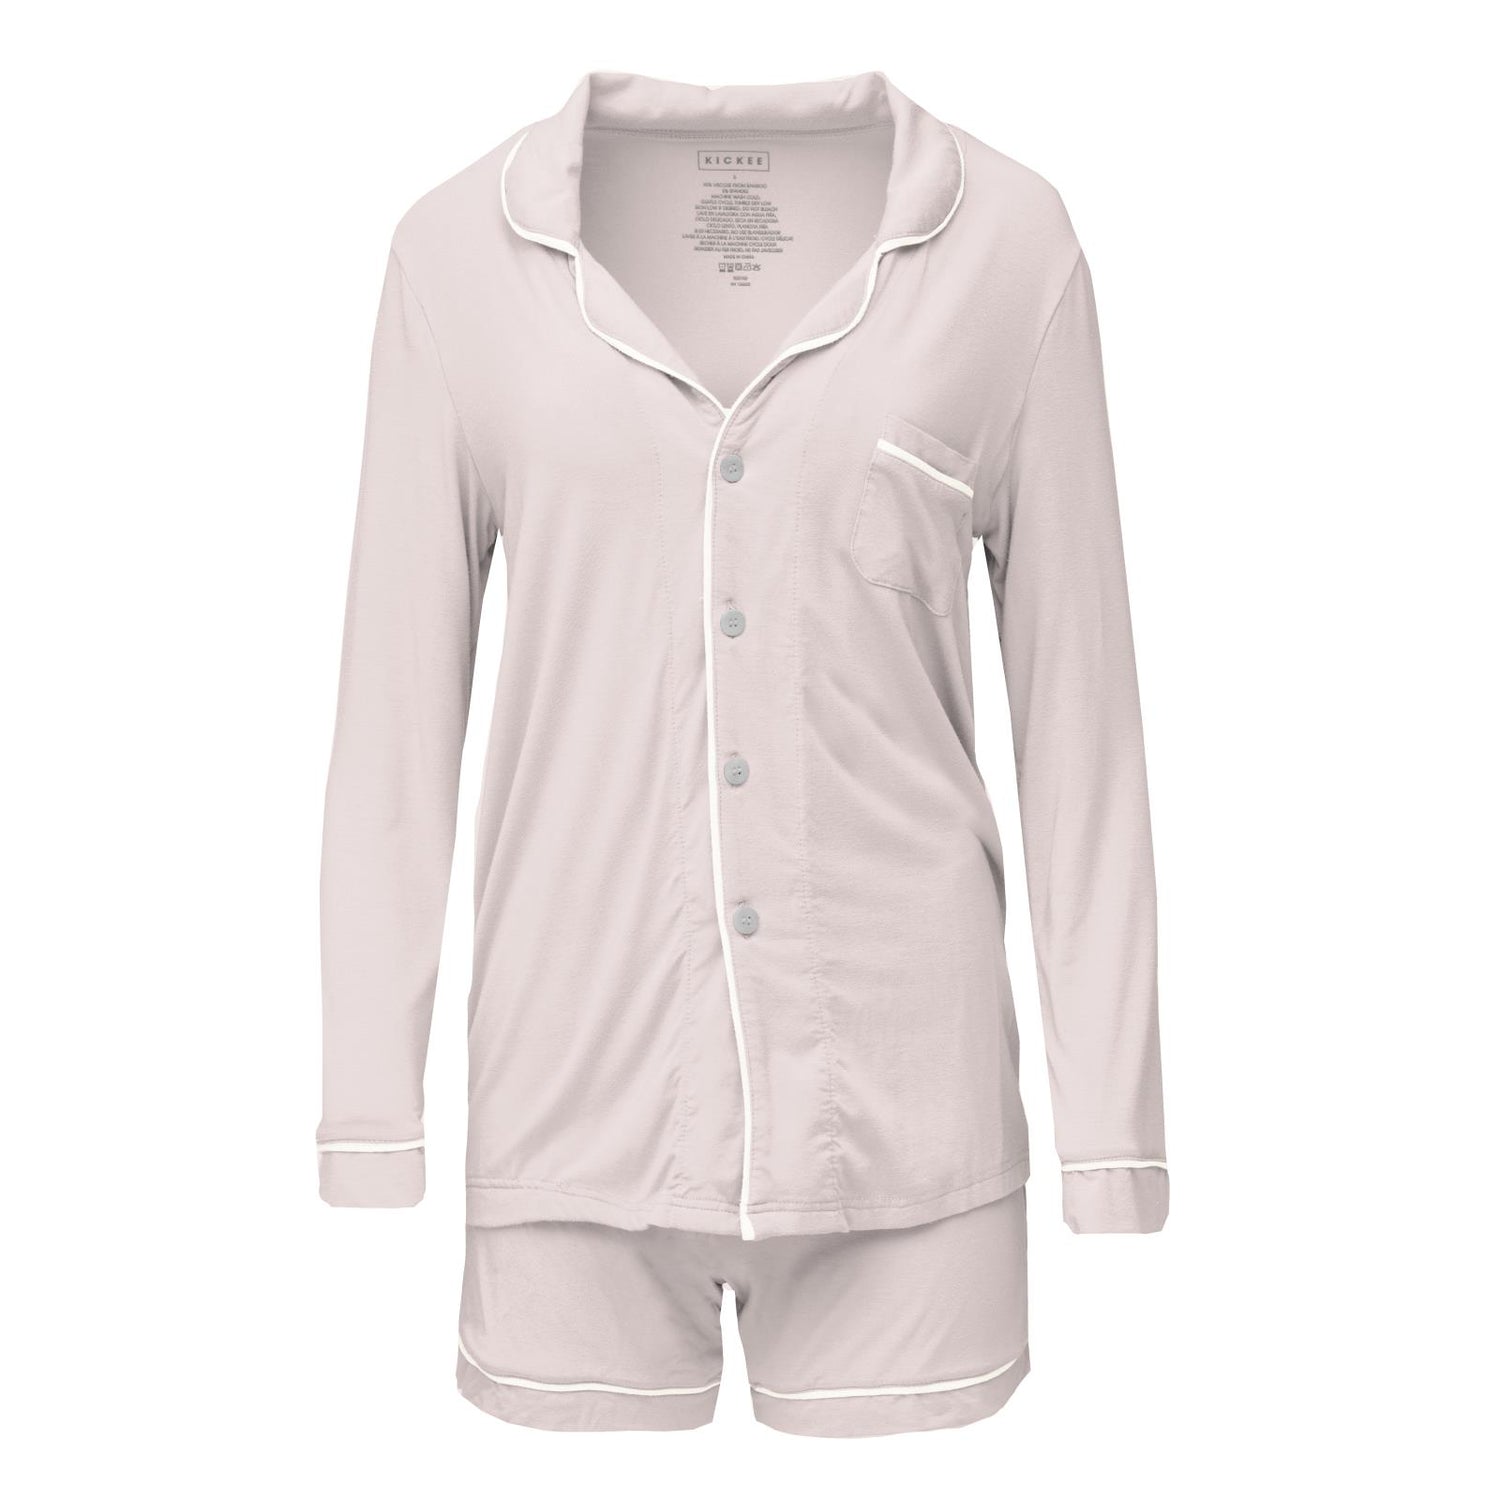 Women's Long Sleeve Collared Pajama Set with Shorts in Macaroon with Natural